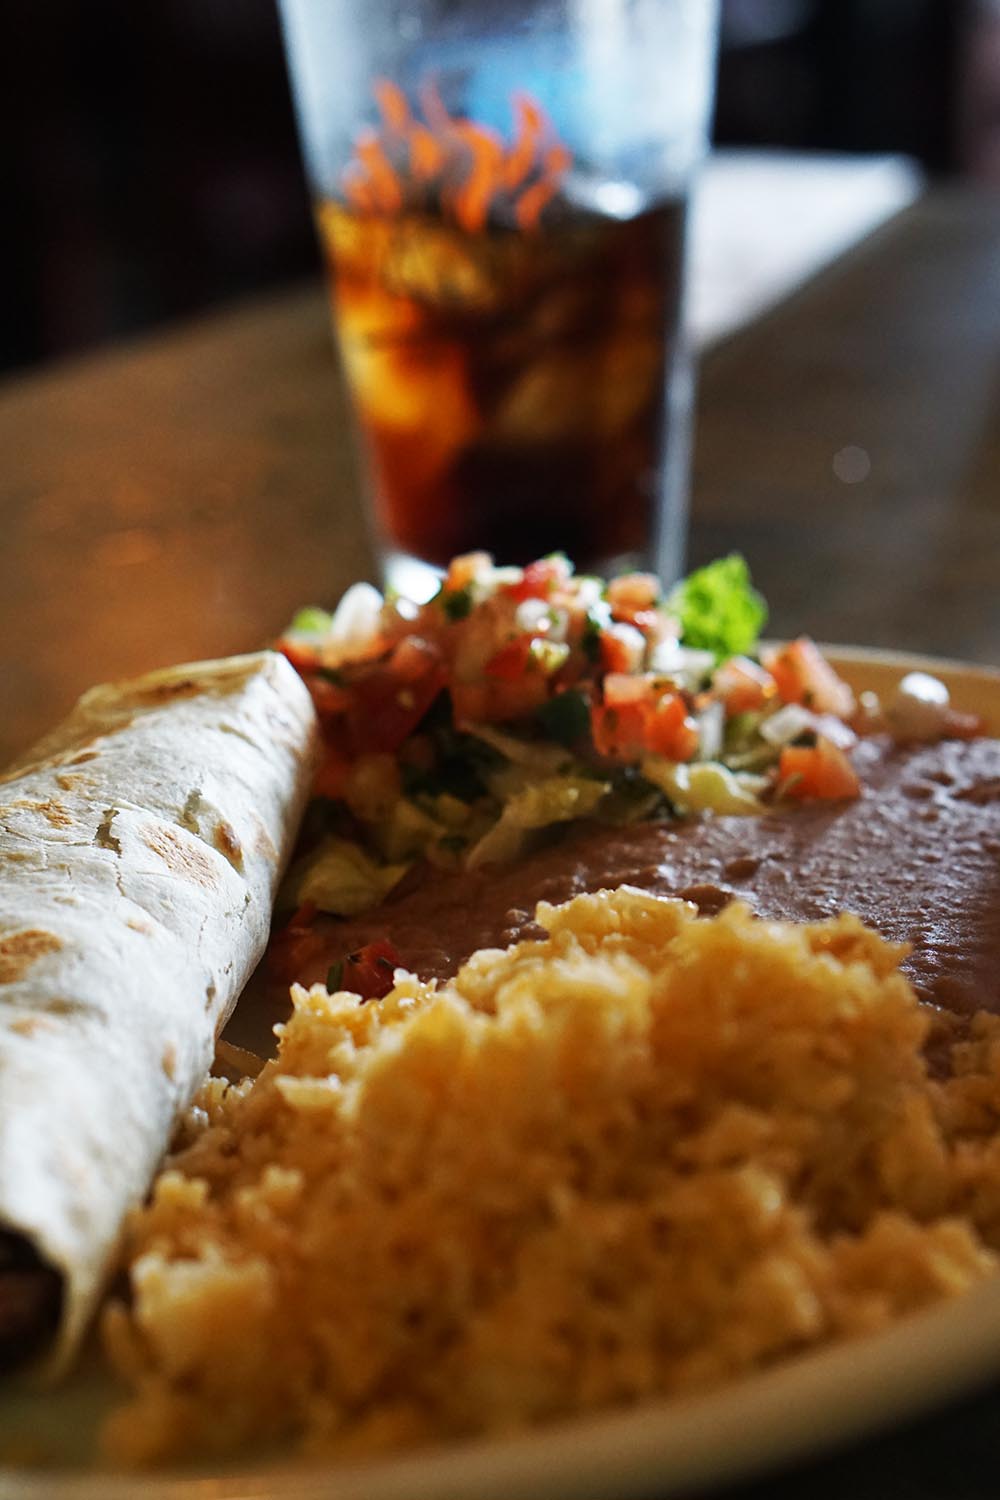 Tacos el Carbon - rolled tortillas filled with your choice of chicken or steak.